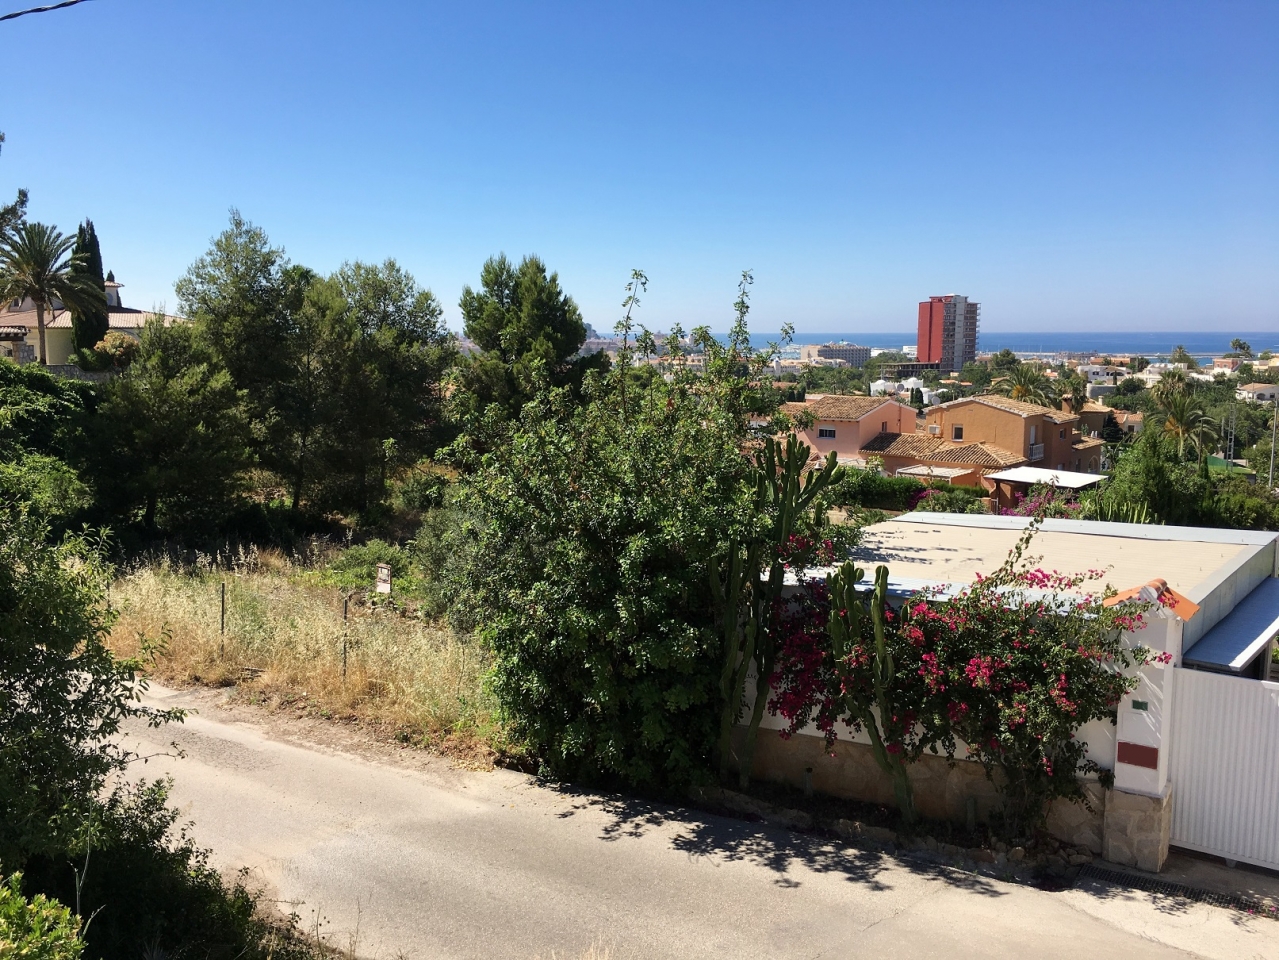 Plot in Denia, close to the beach and city centre. Quiet area. Mountain views.